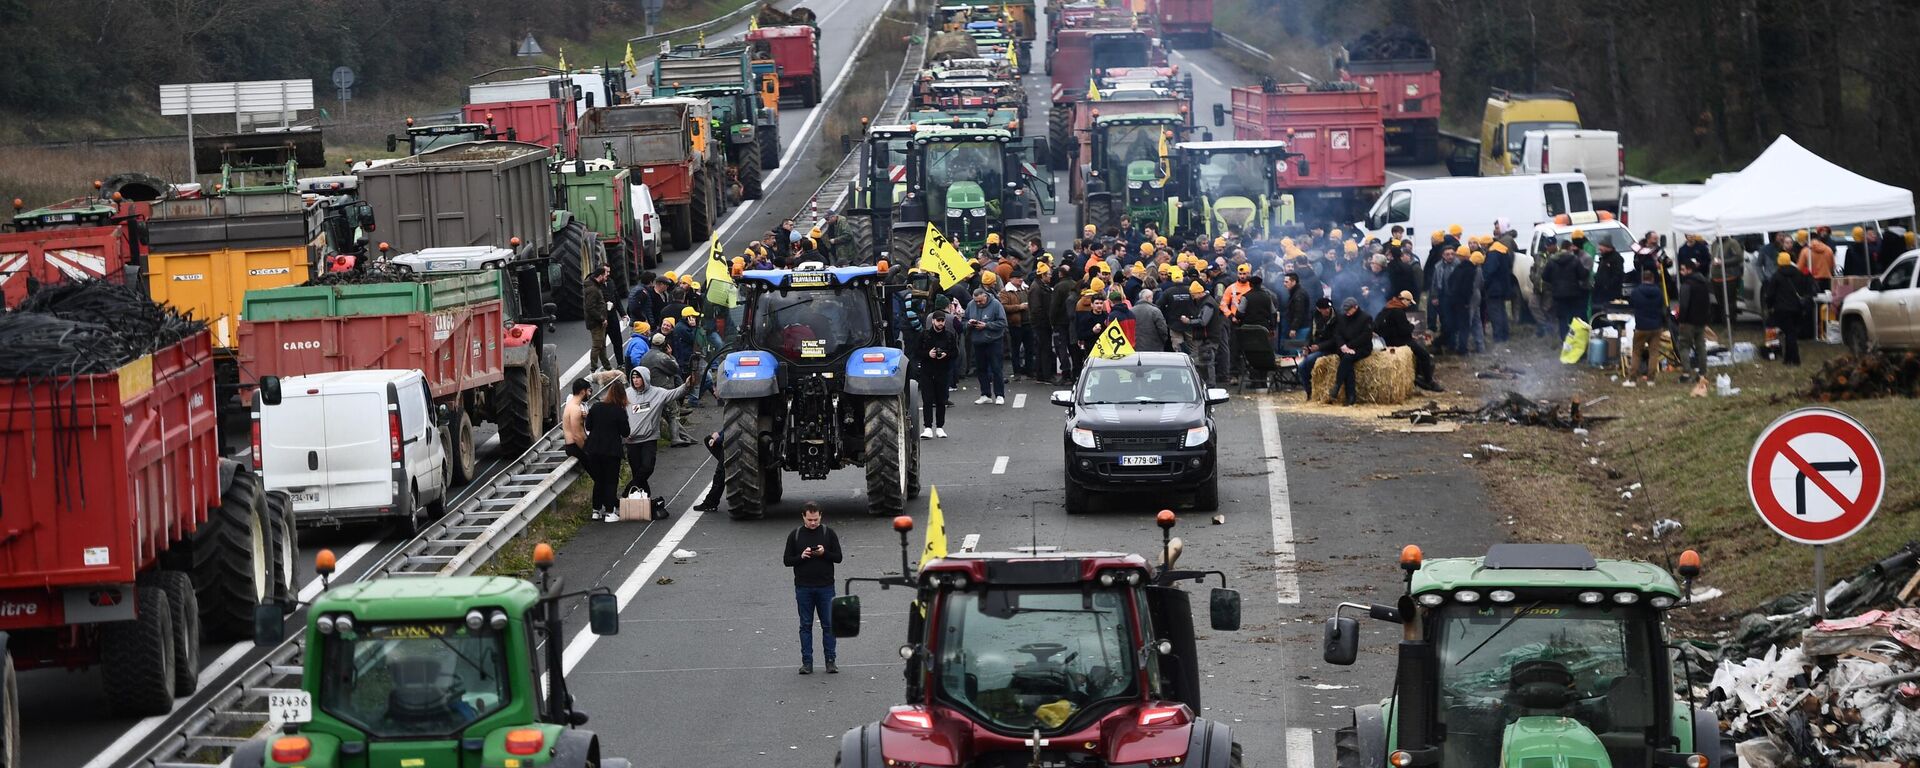 Farmers block the A62 highway to protest over taxation and declining income, near Agen. - Sputnik International, 1920, 25.01.2024